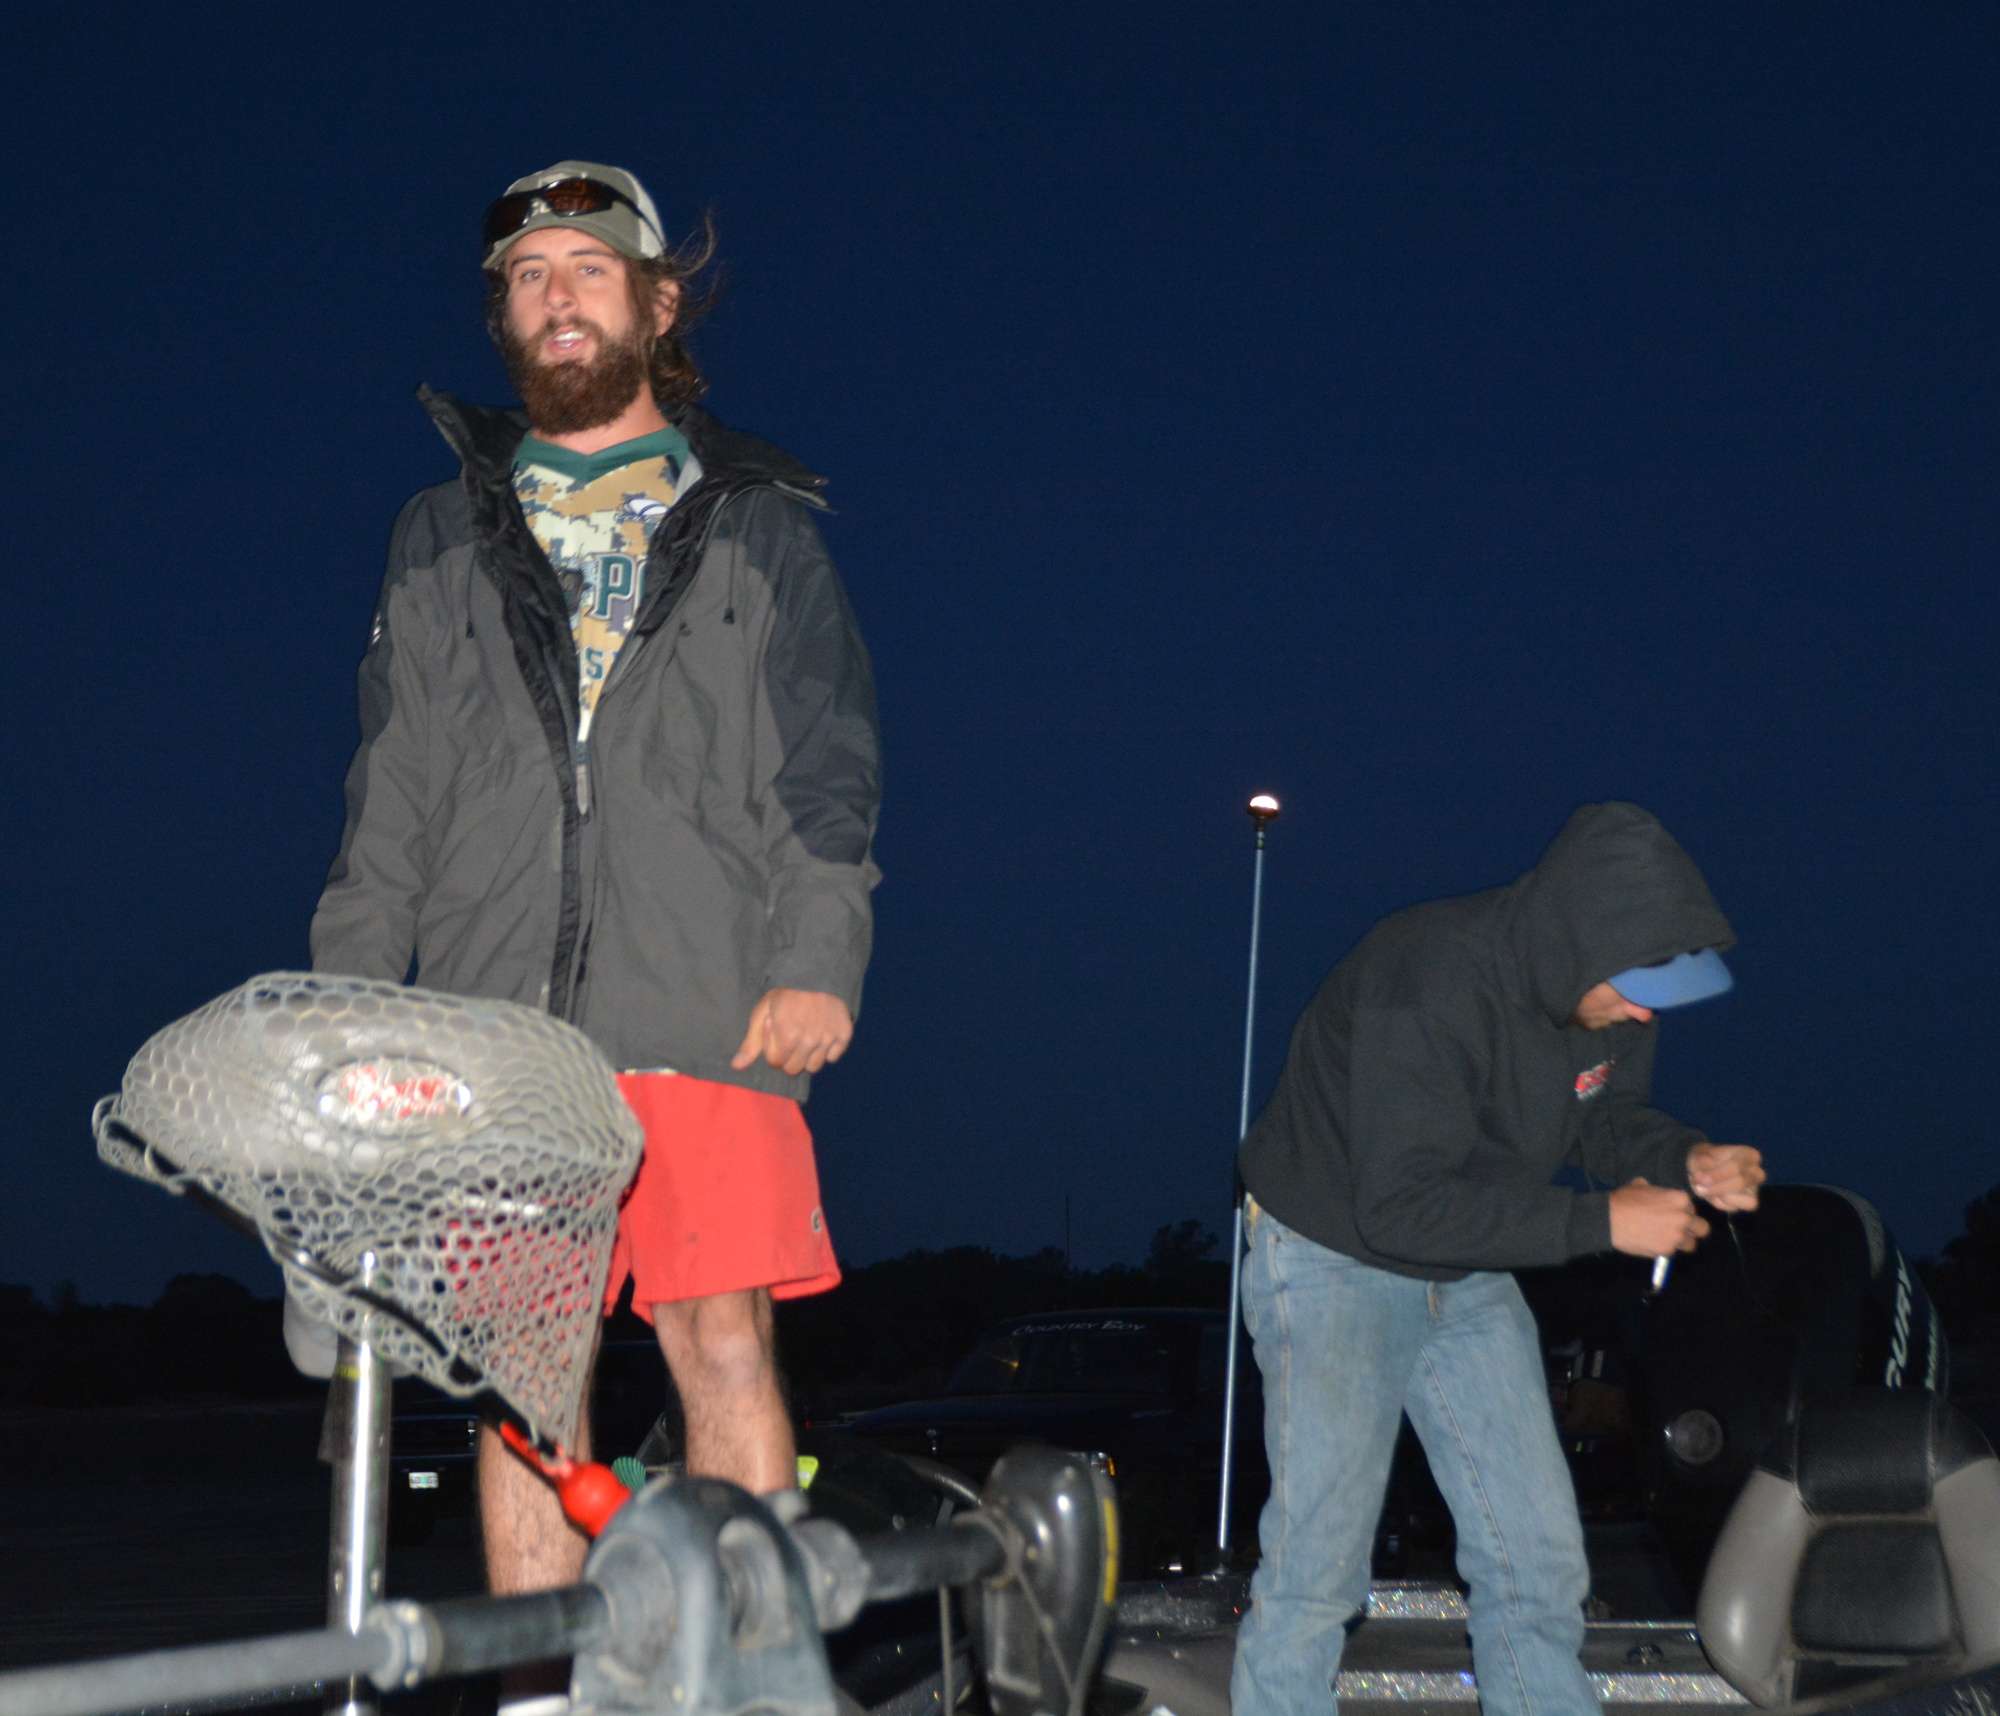 John Zeolla of Cal Poly prepares for the last day of the Carhartt Bassmaster College Series Western Regional presented by Bass Pro Shops.